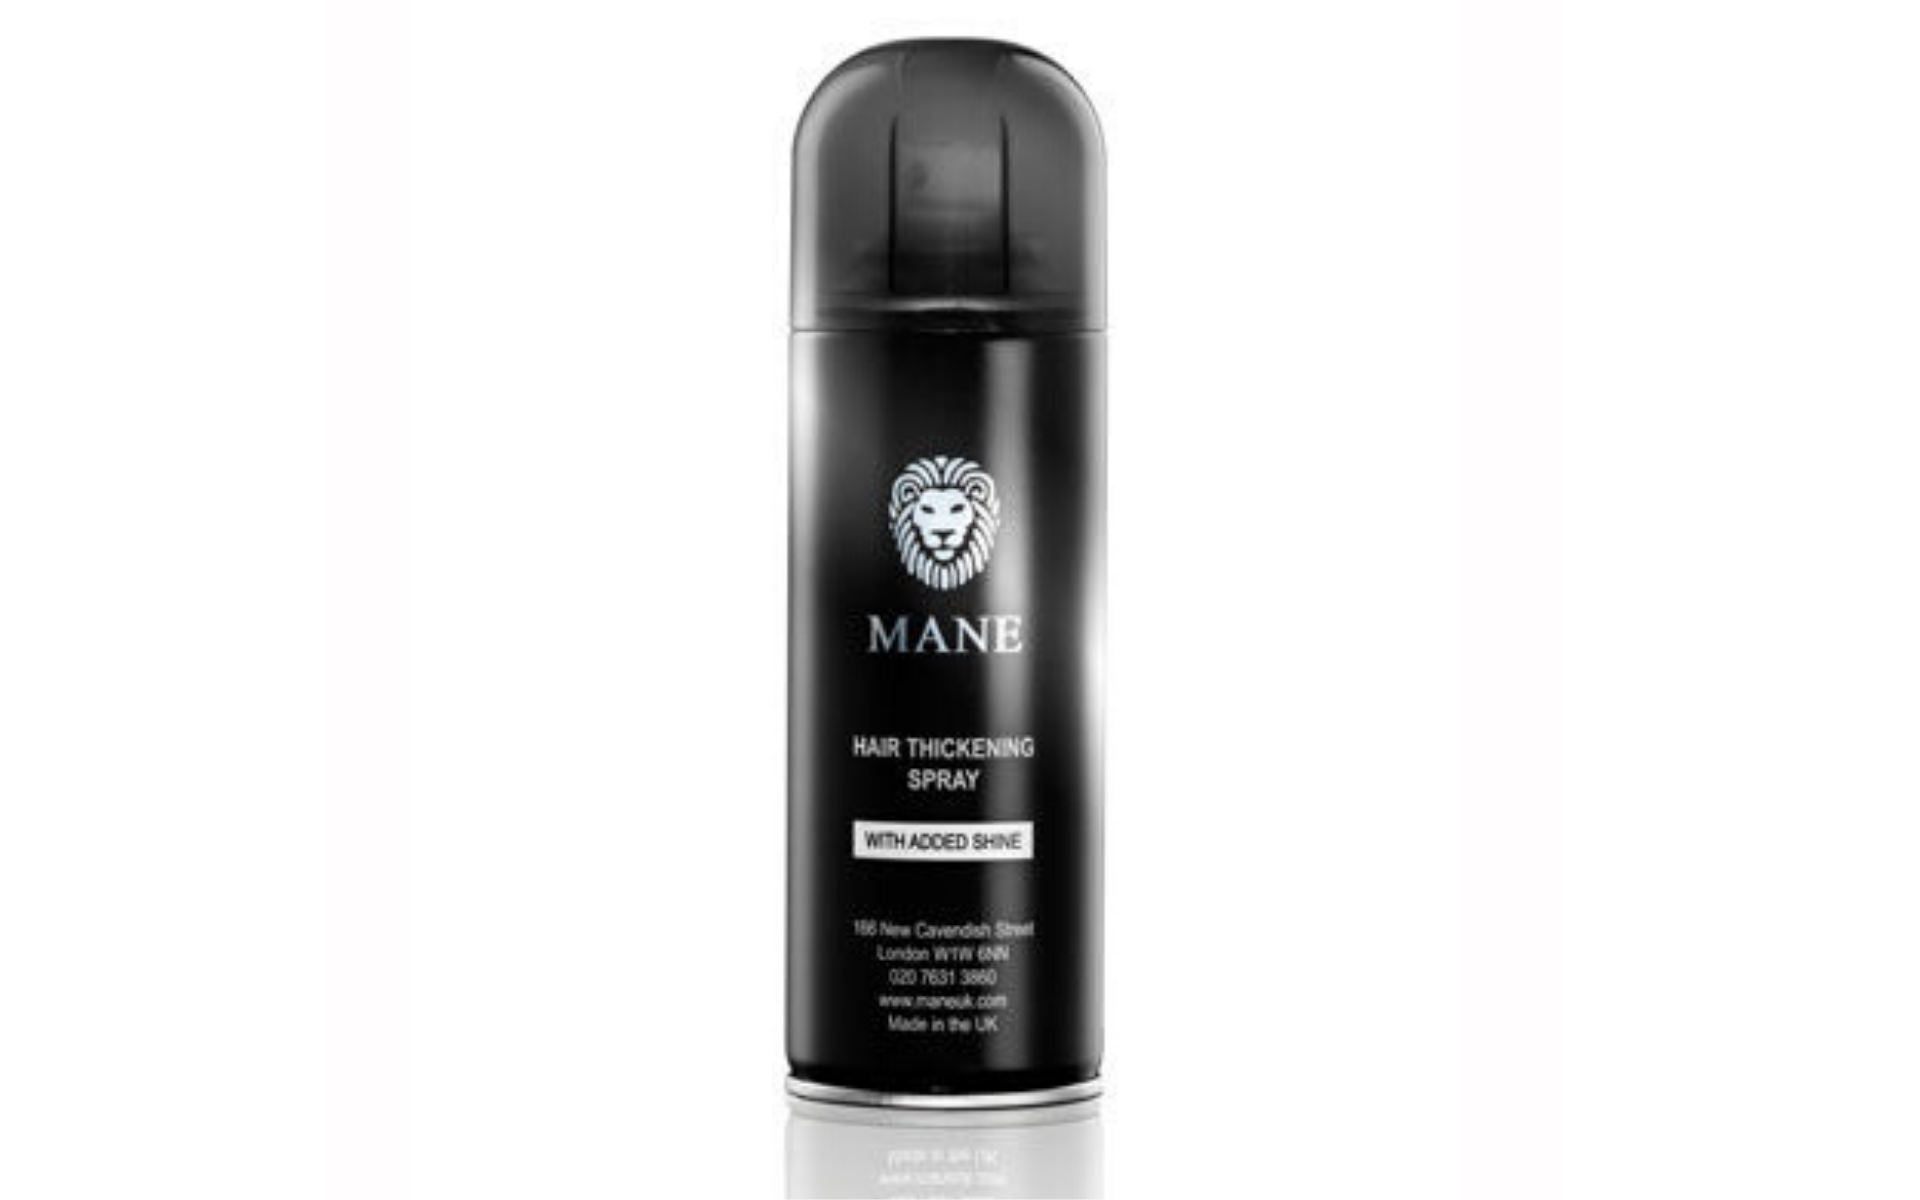 MANE HAIR THICKENING SPRAY AND ROOT CONCEALER IN GLASGOW